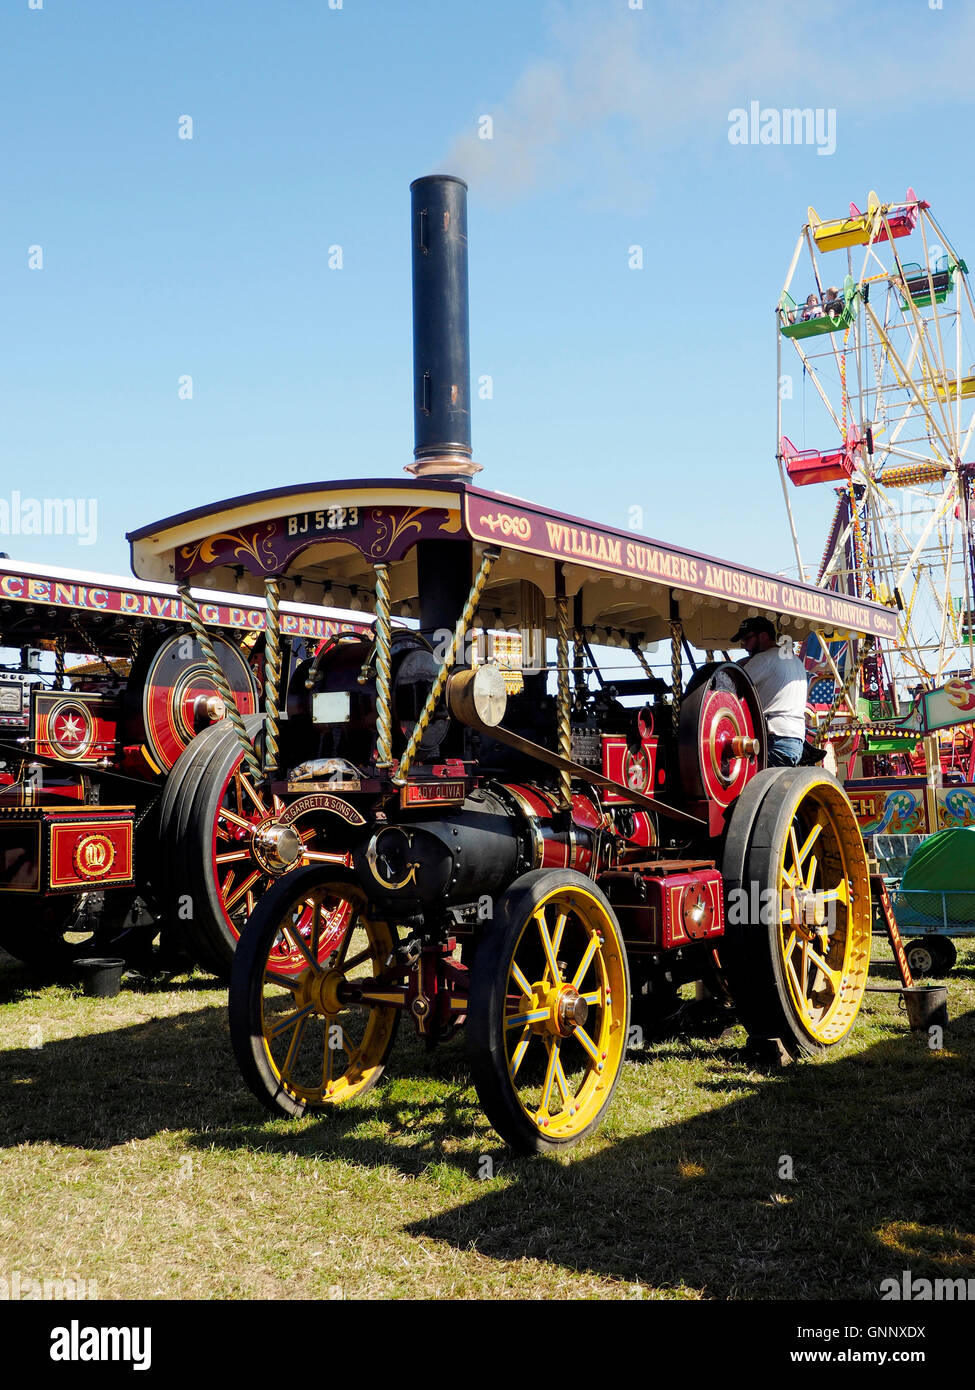 A Burrell showmans engine (steam engine) powering a traditional fairground ride at the Great Dorset Steam Fair 2016 Stock Photo